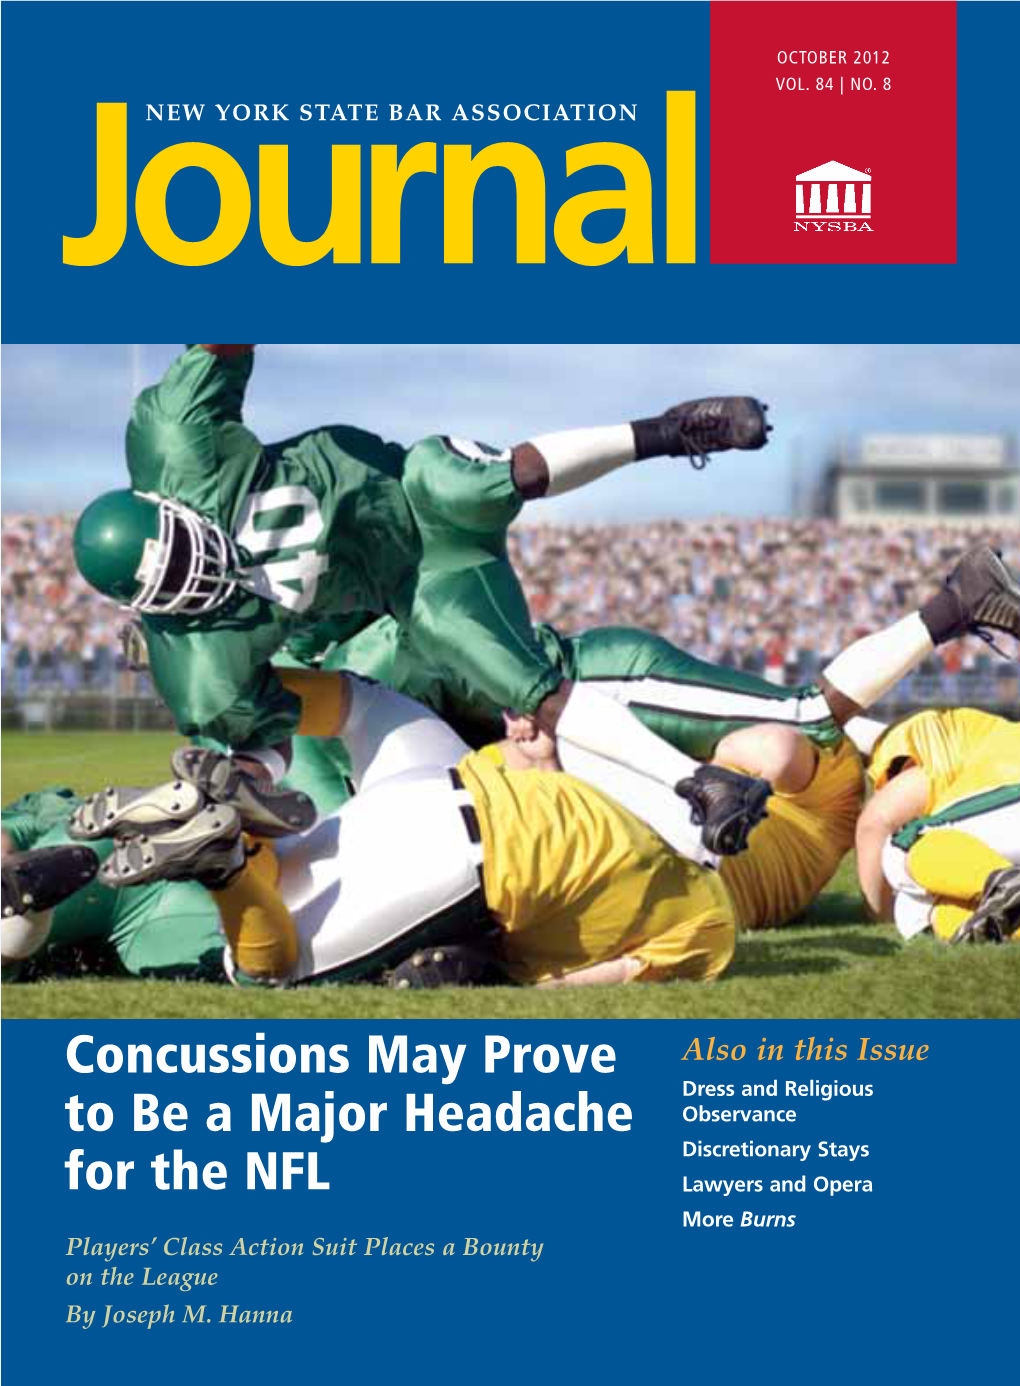 CONCUSSIONS MAY PROVE to BE a MAJOR HEADACHE for the NFL Players’ Class Action Suit Places a Bounty on the League by Joseph M